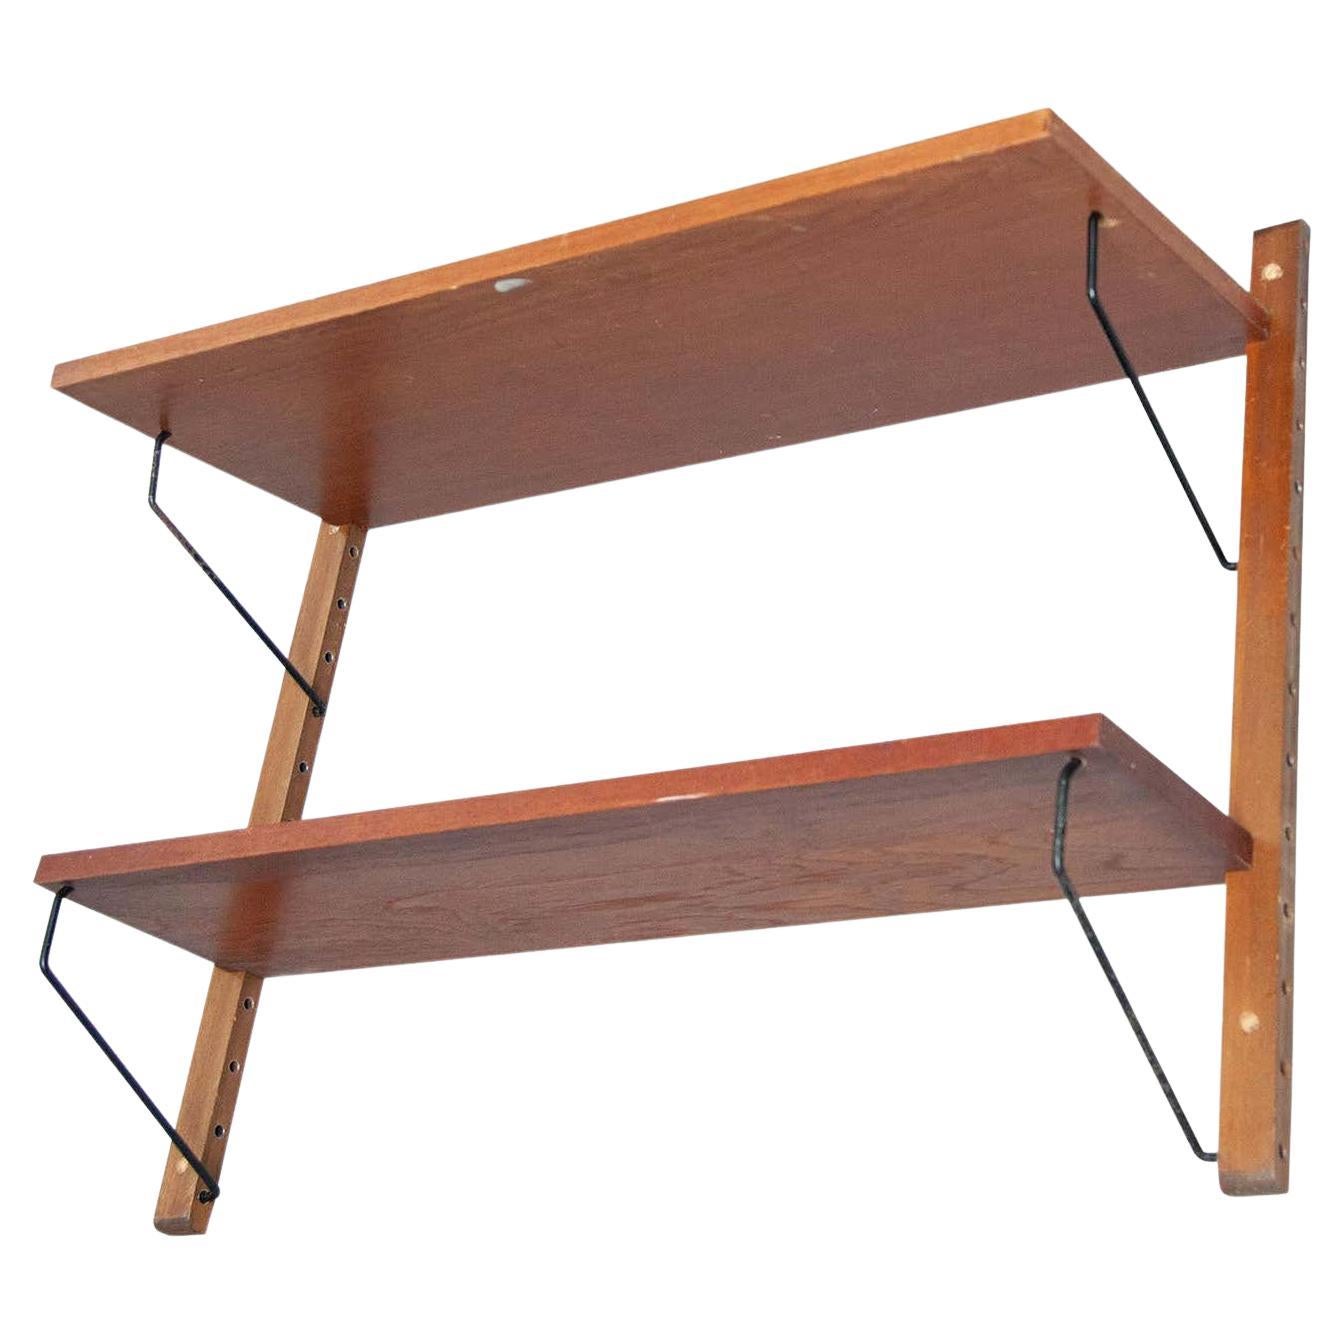 Mid-Century Modern French Modular System Shelve, Wood and Metal